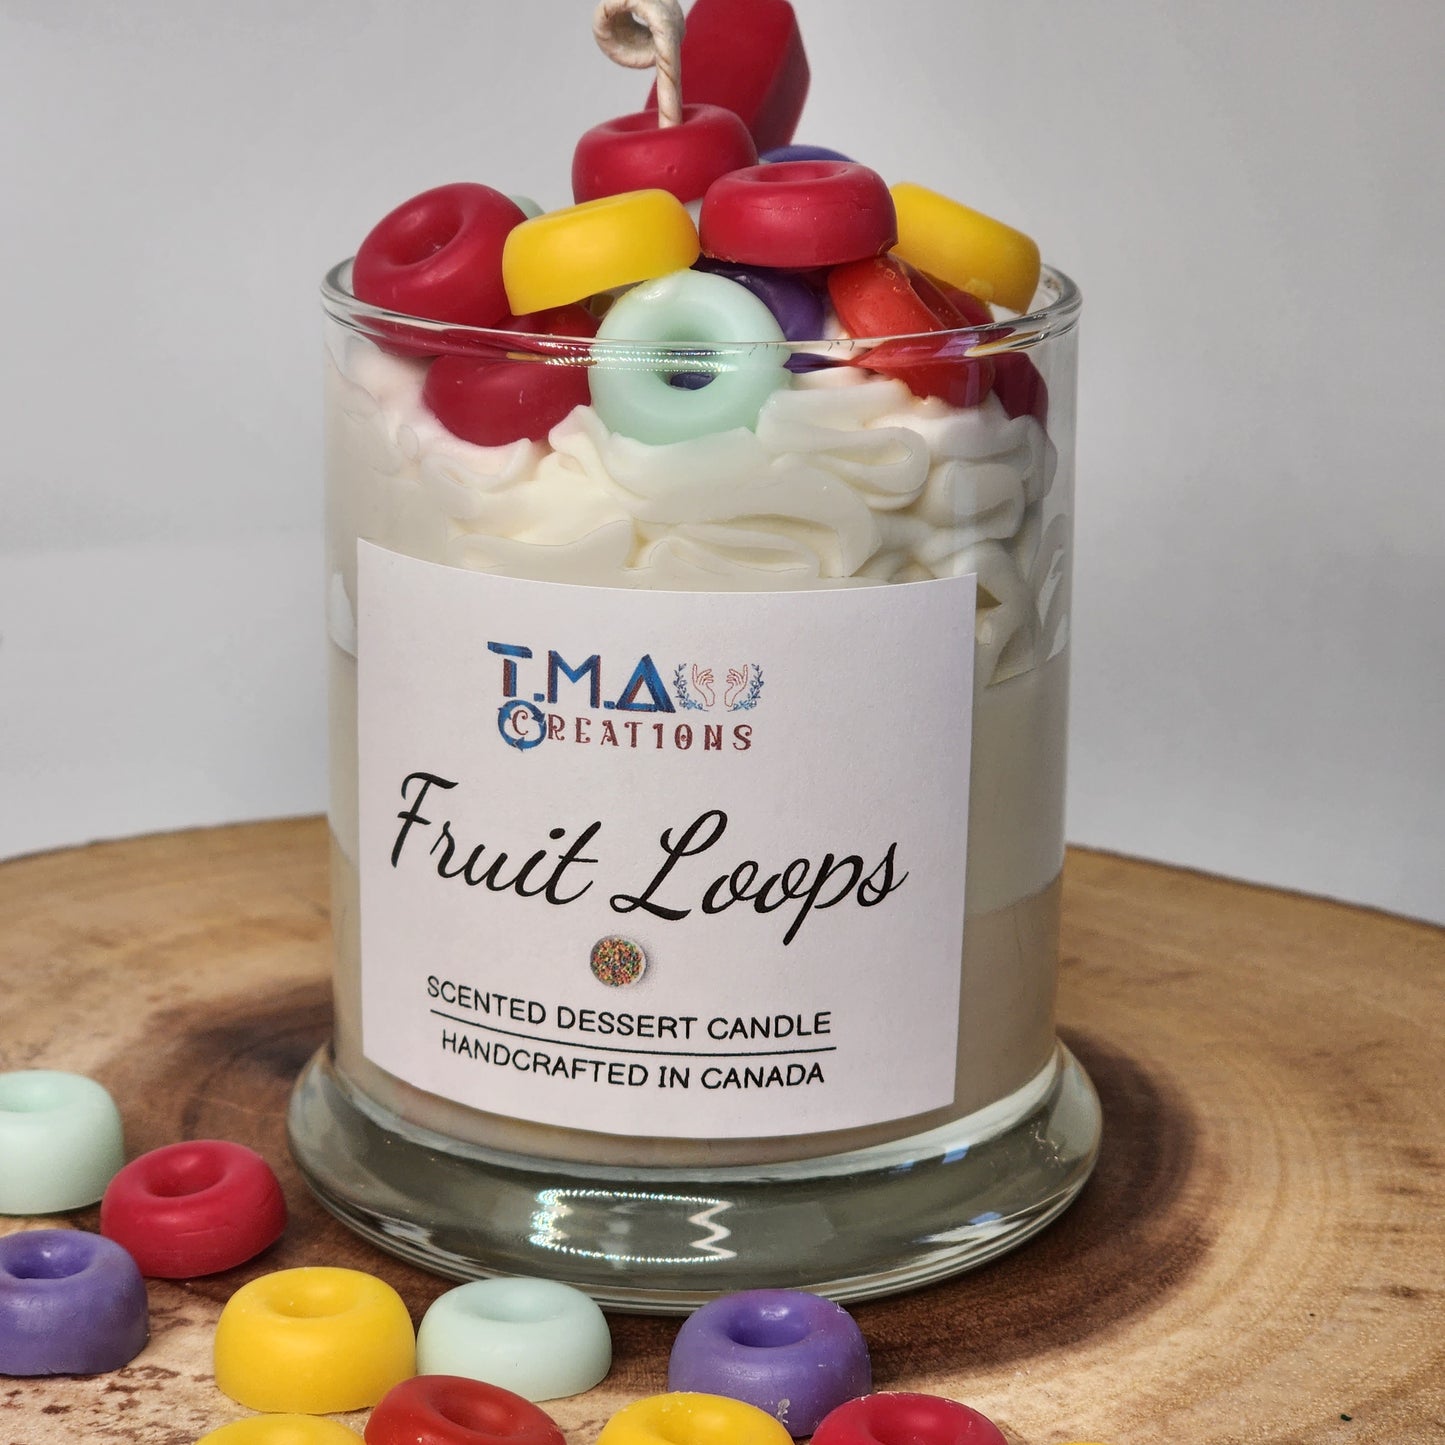 "Fruit Loops" Cereal Candle